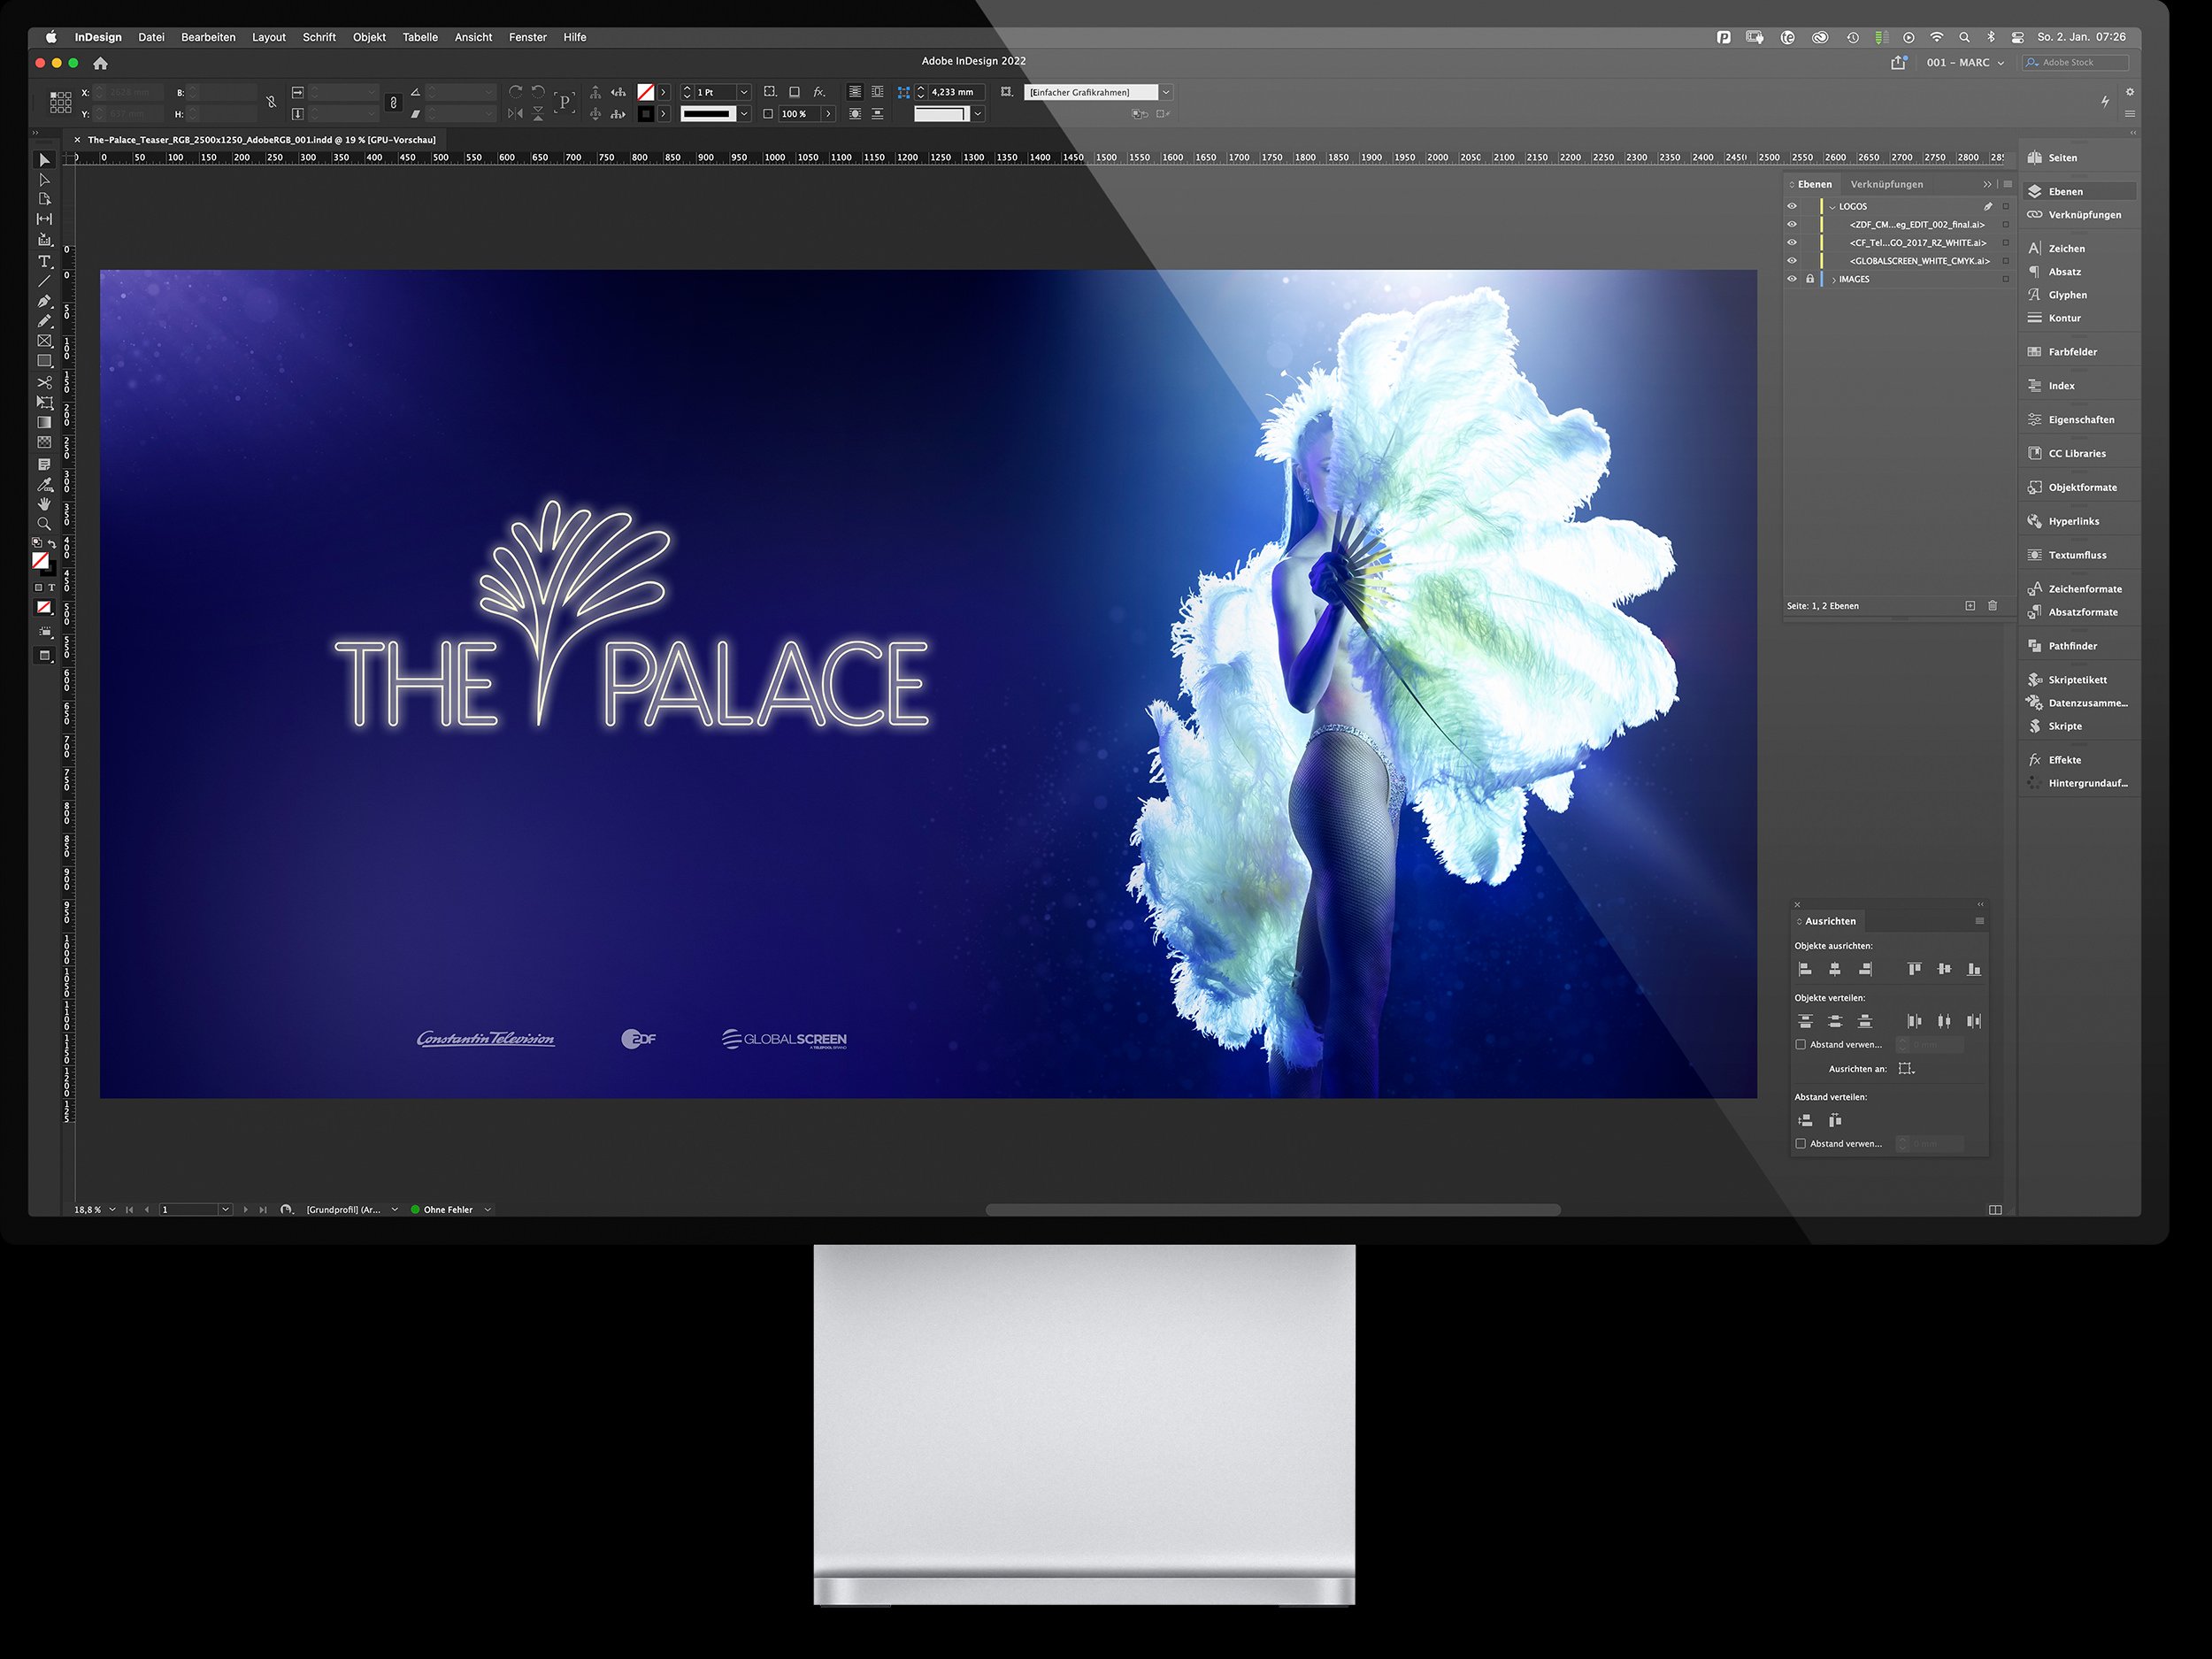 MarcPerino-com_Pro-Display-XDR_Horizontal_SOAP-IMAGES_The-Palace_Indesign_black.jpg